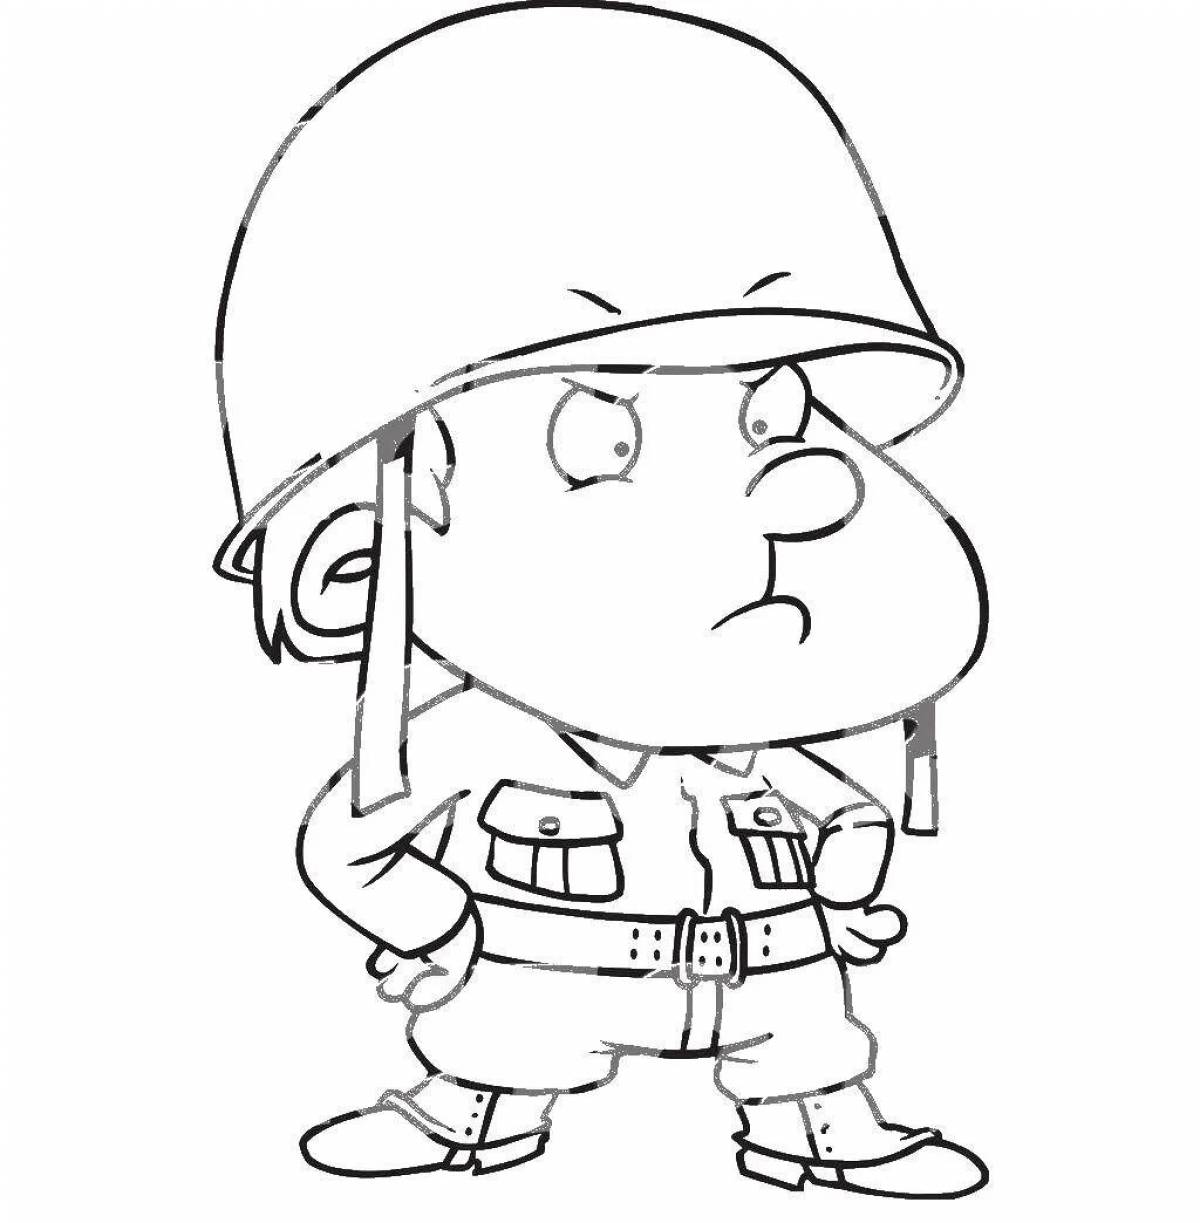 Tiny soldier coloring page